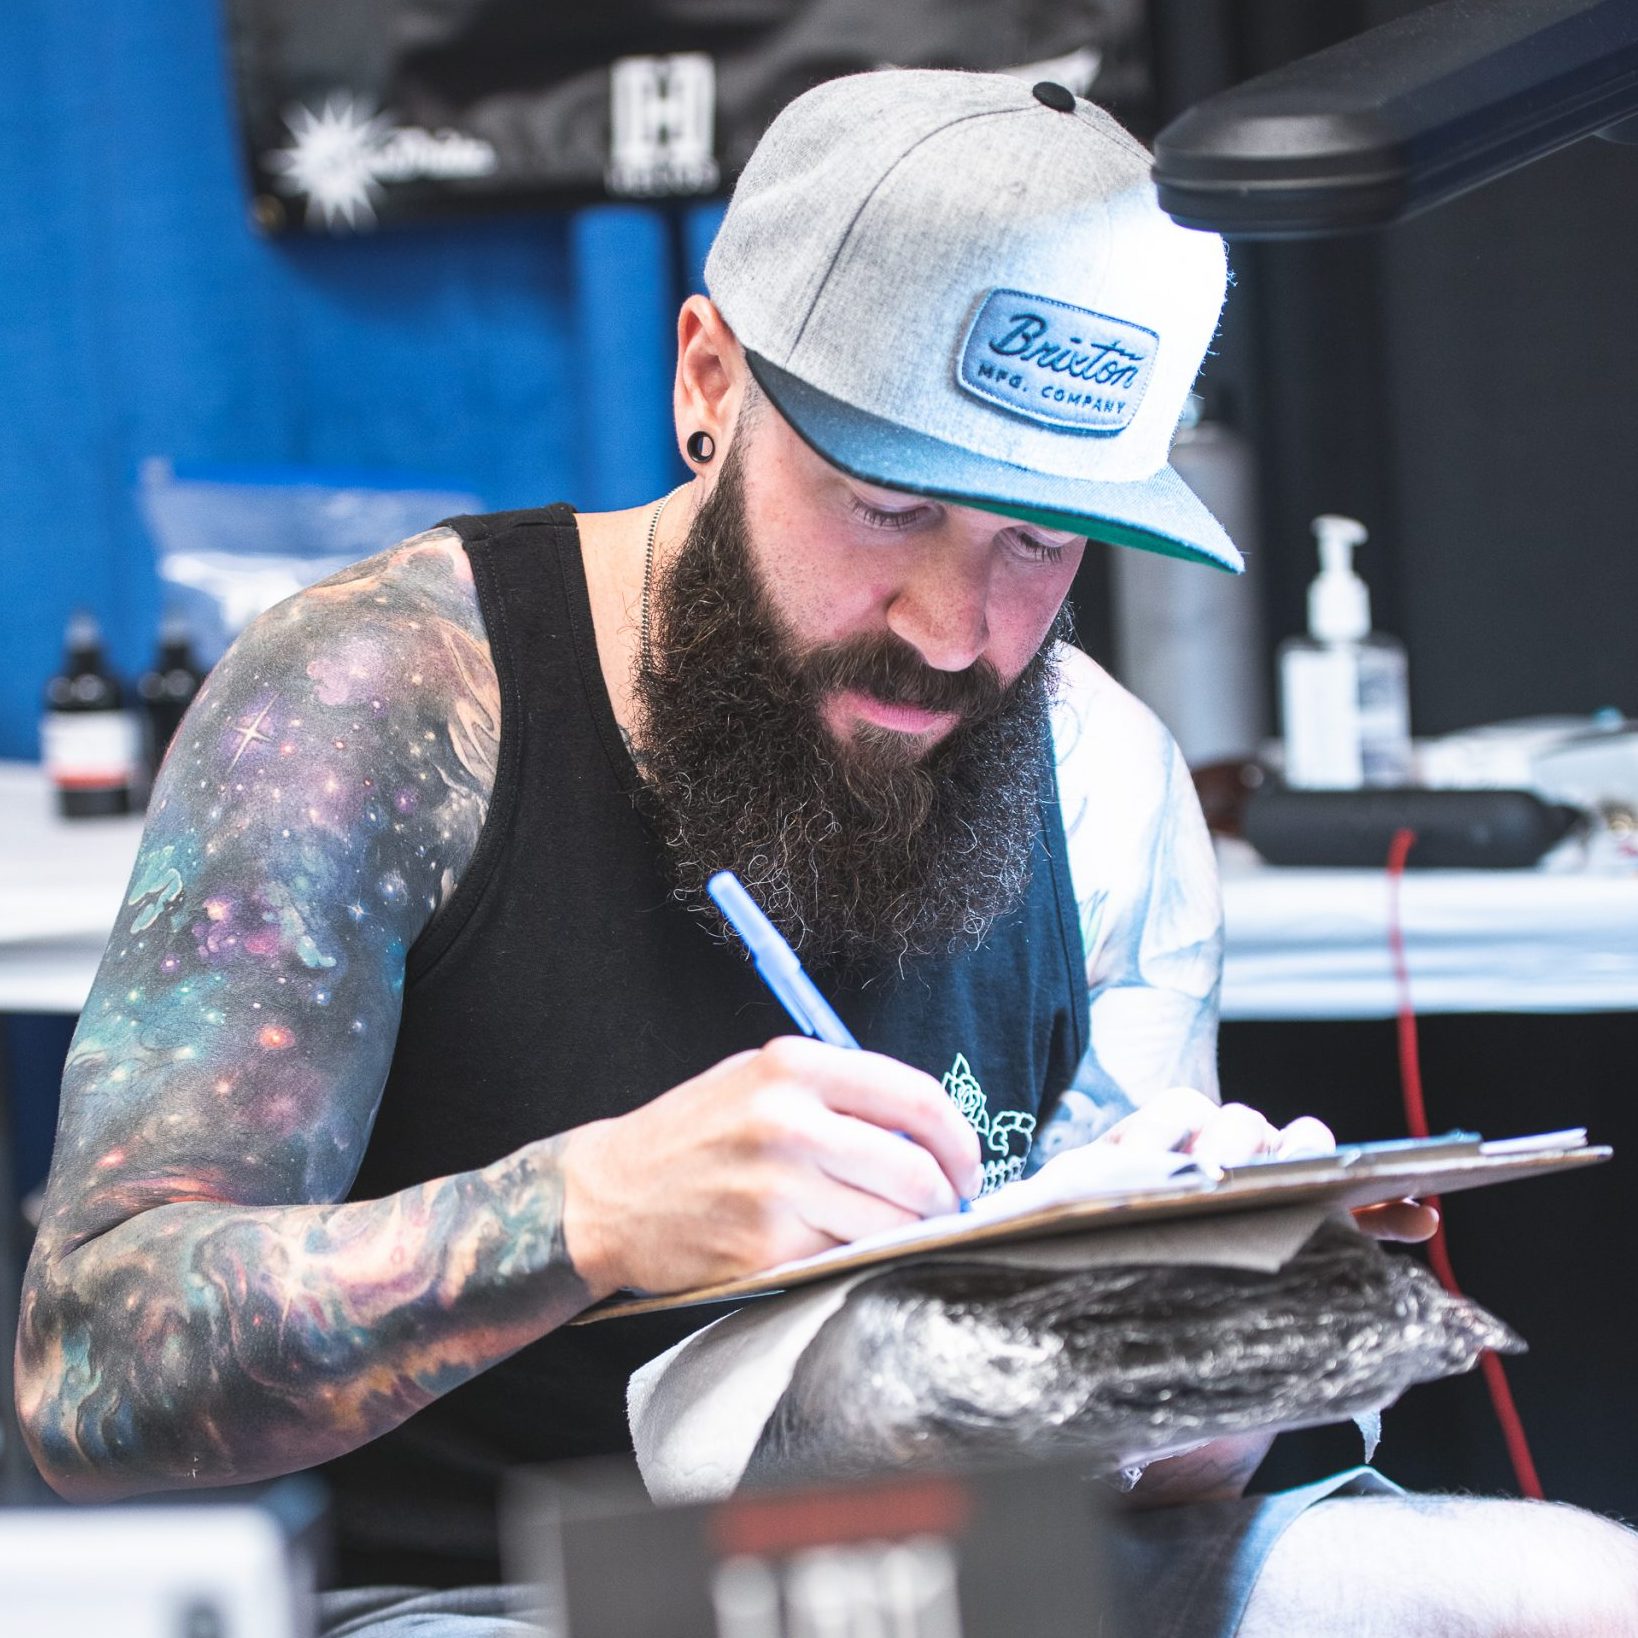 Photo of a tattoo artist signing a paper